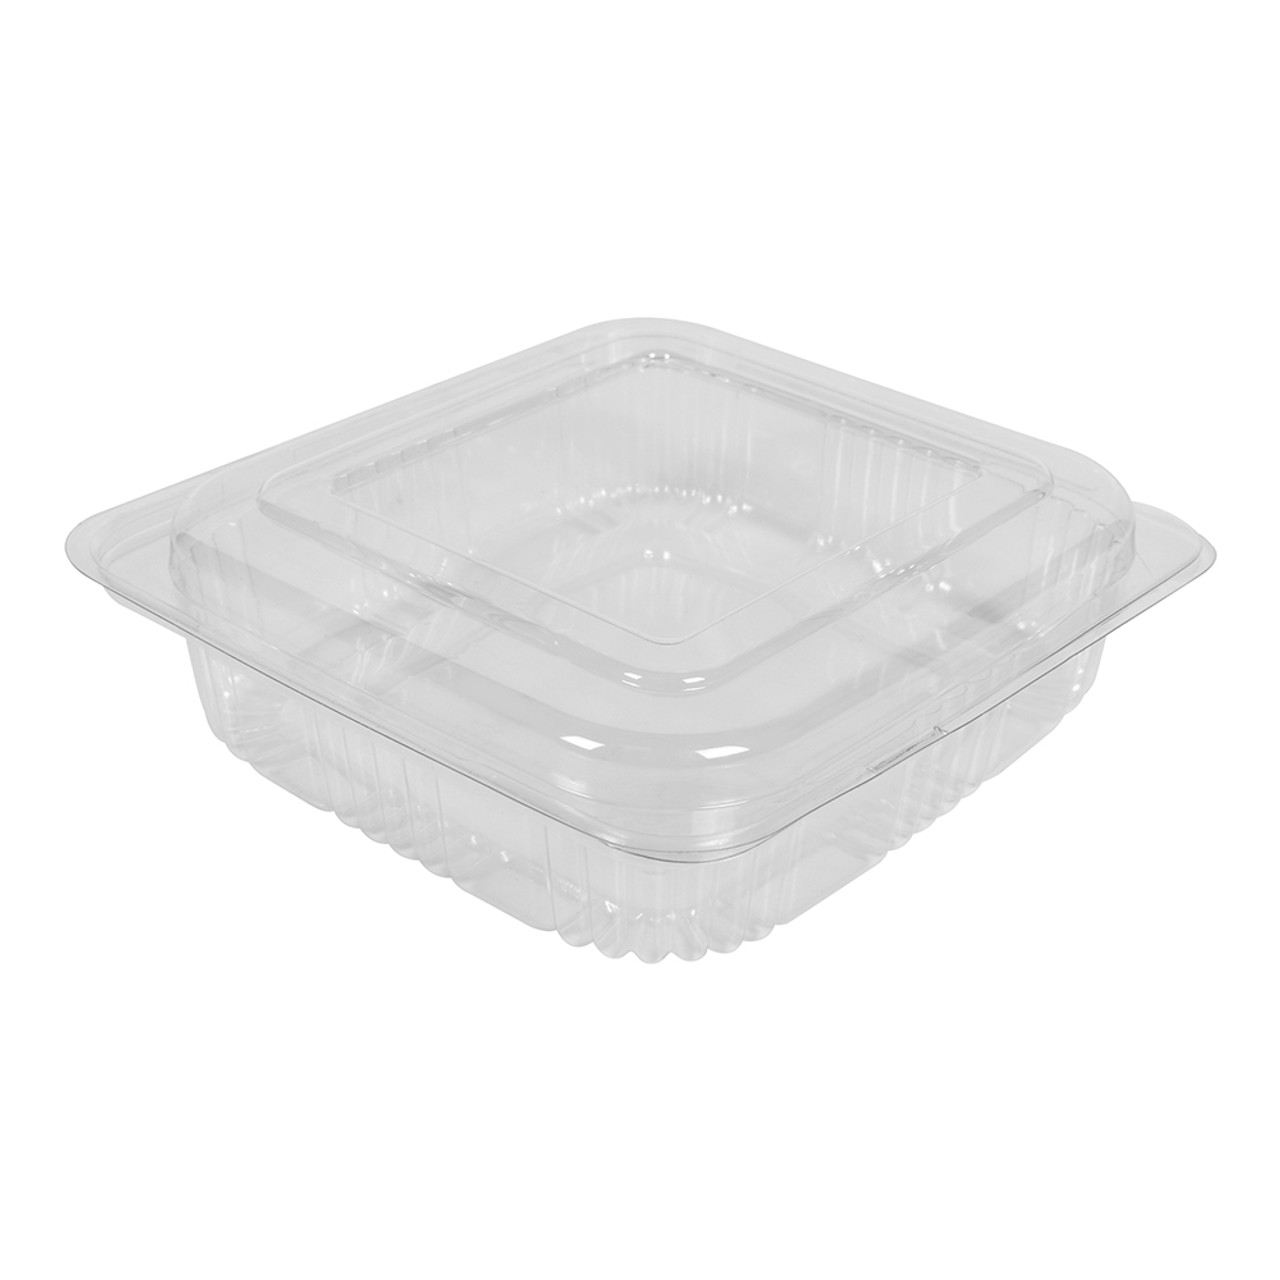 Genpak - Microwave Safe Containers Extra Large Hinged Container, 75 Each, 2 per Case, Price/Case